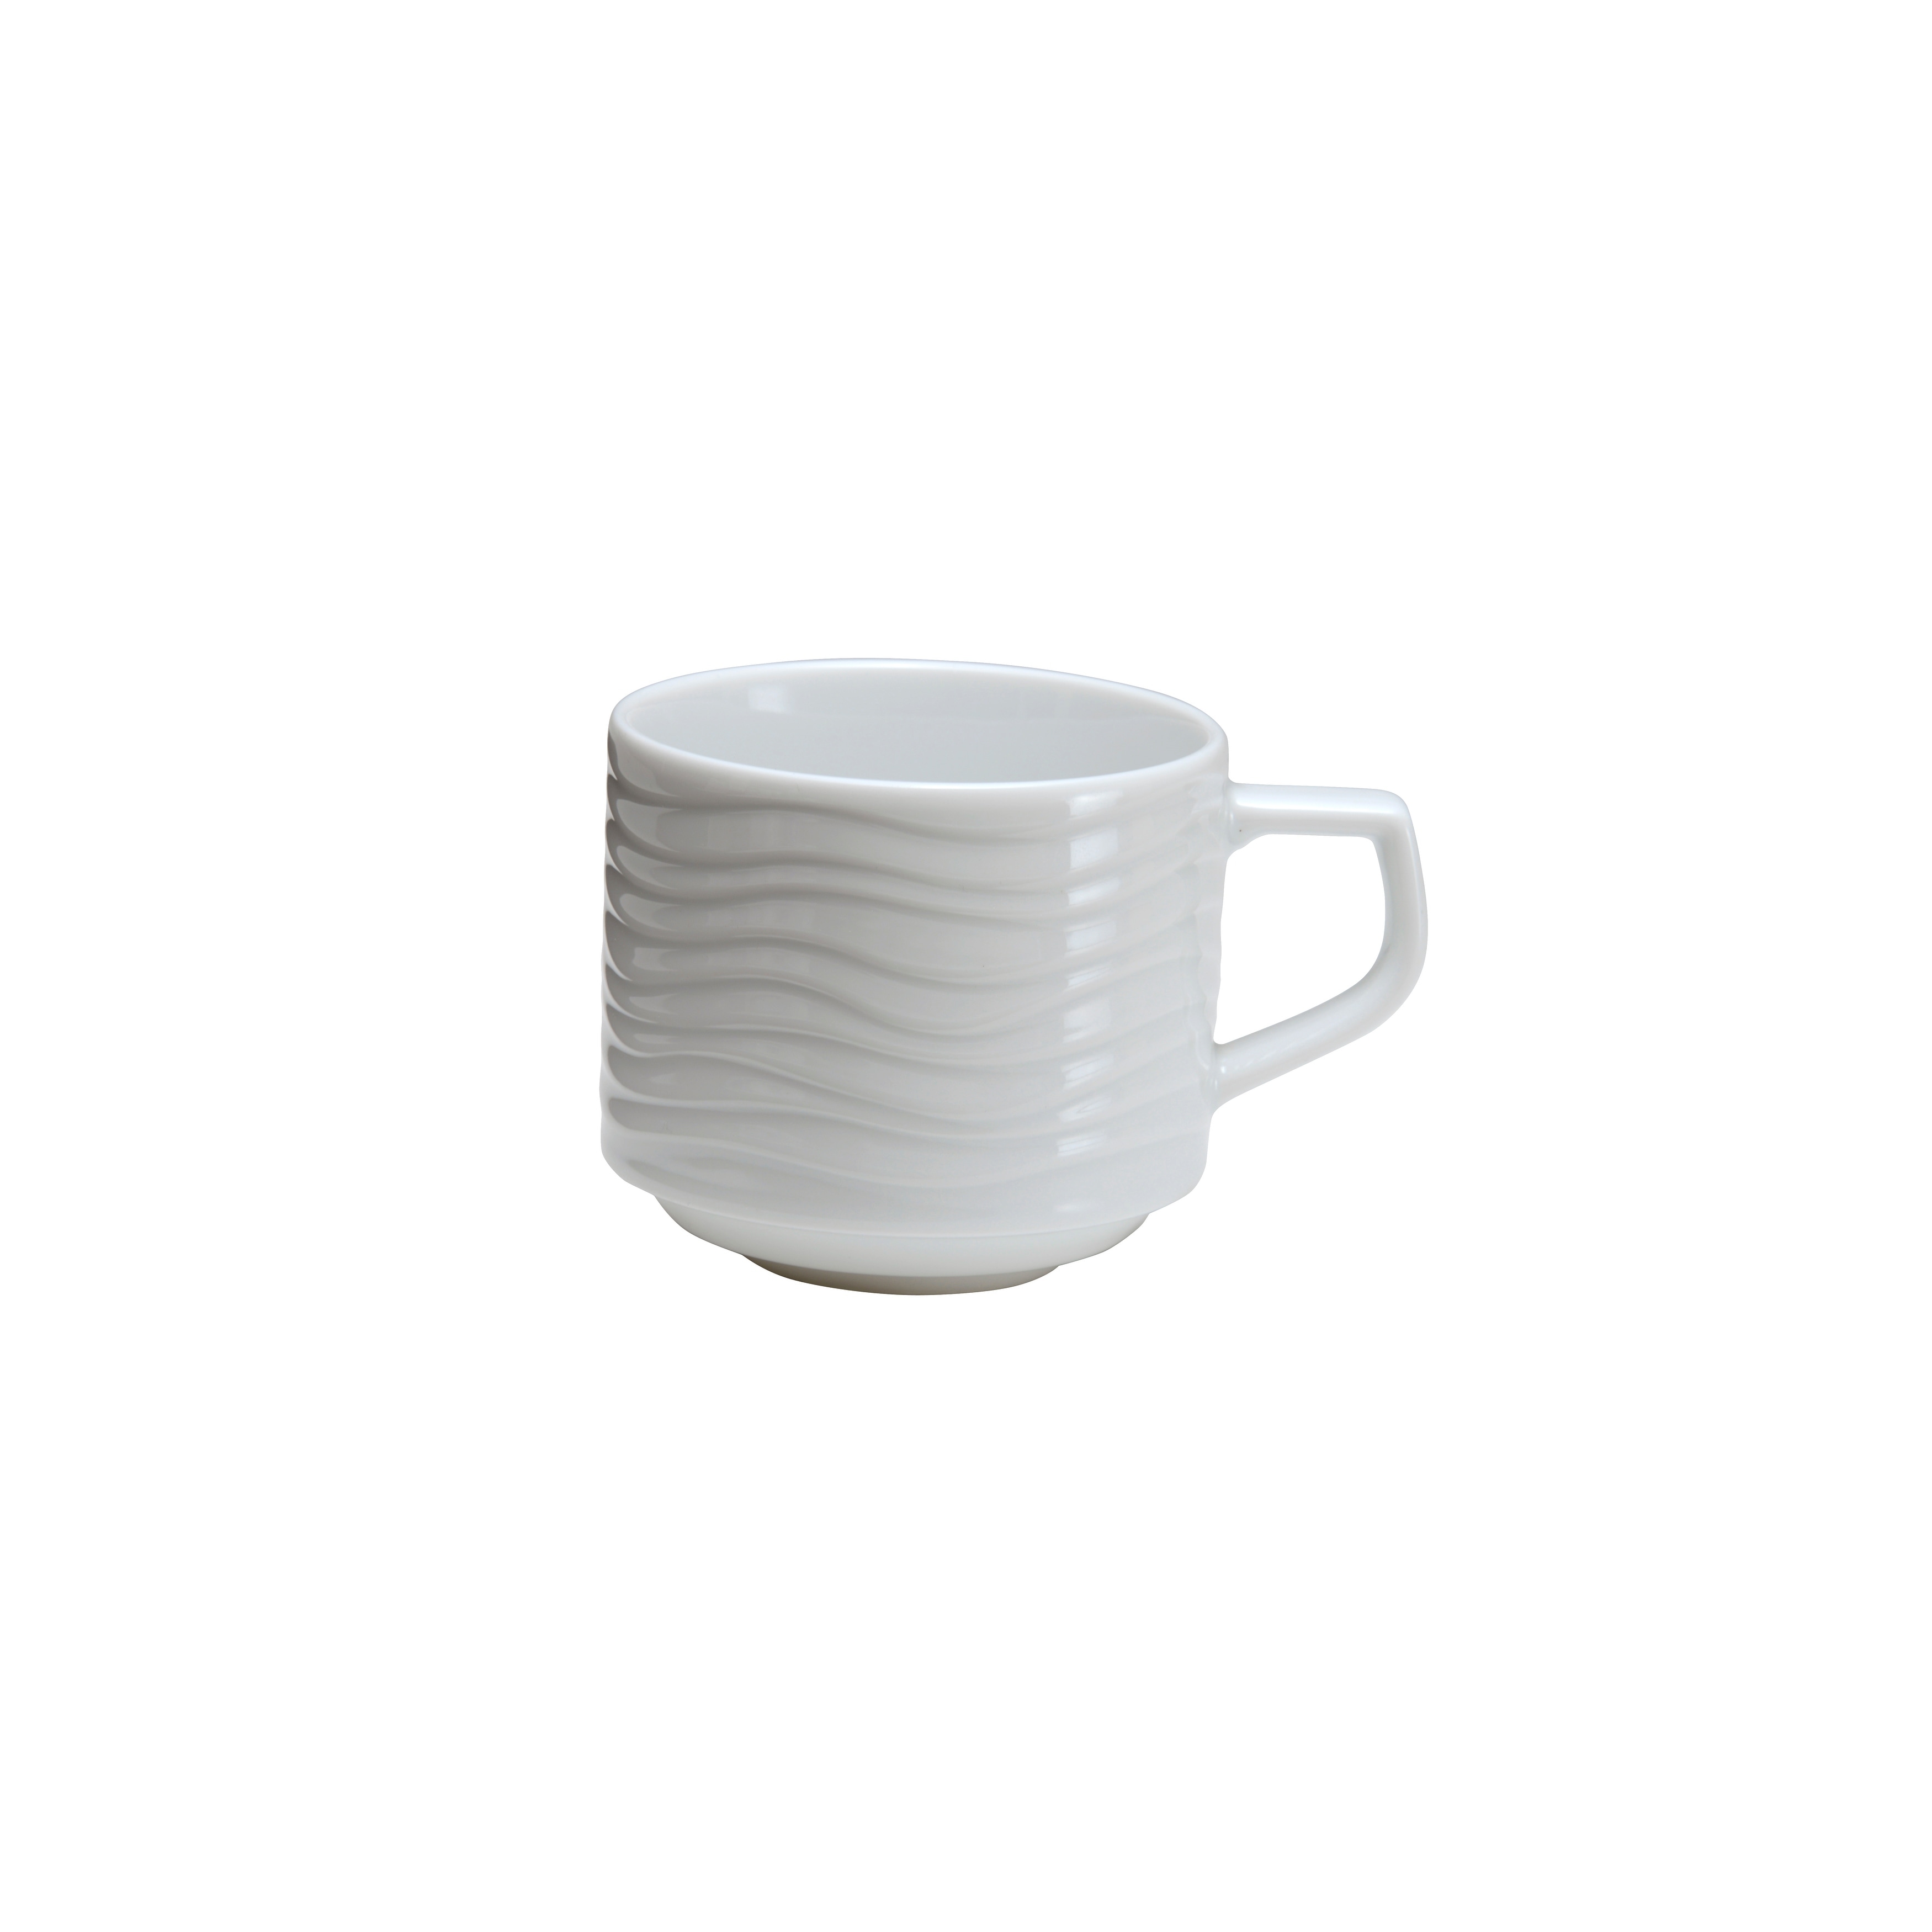 https://ak1.ostkcdn.com/images/products/is/images/direct/ae7256065a08eef214197b040350f52ec0ab5f25/Sant%27-Andrea-Sahara-Porcelain-Espresso-Cups-3.5-oz-%28Set-of-36%29-by-Oneida.jpg